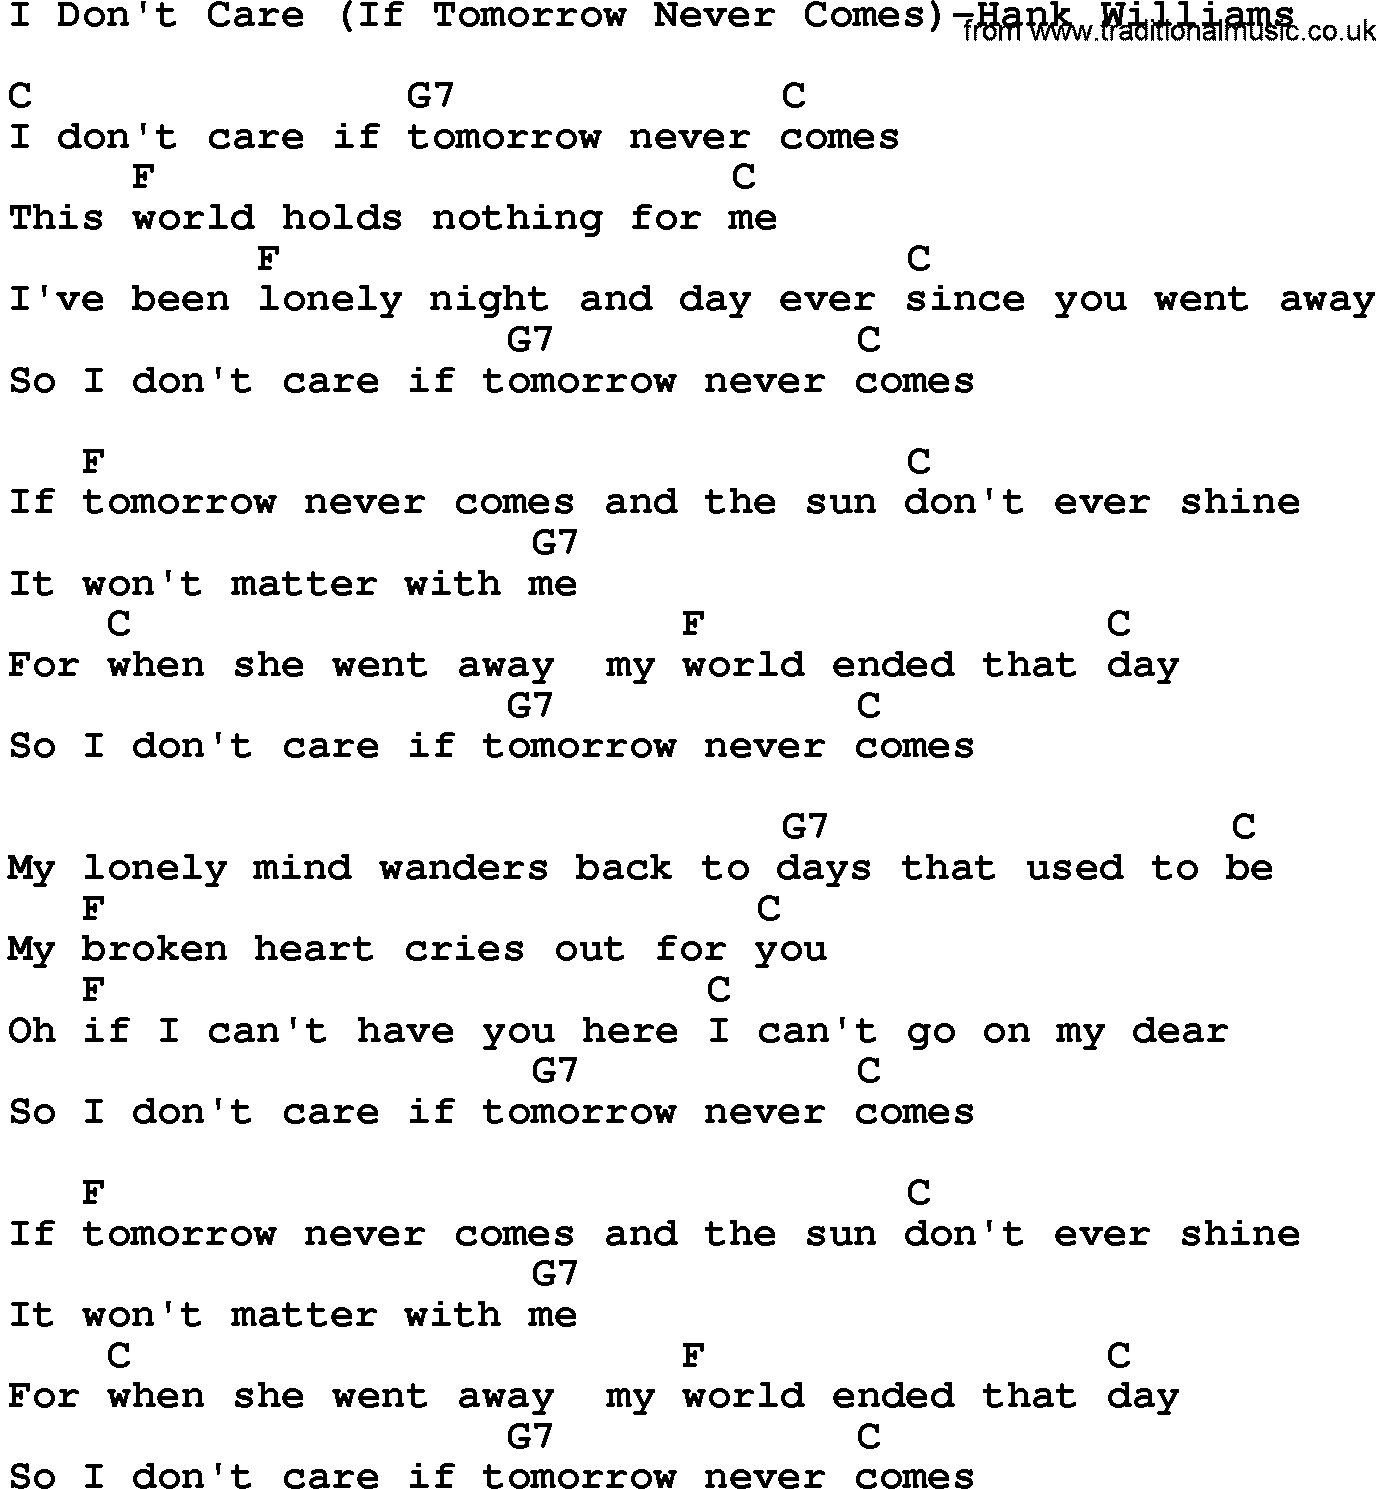 Country music song: I Don't Care(If Tomorrow Never Comes)-Hank Williams lyrics and chords